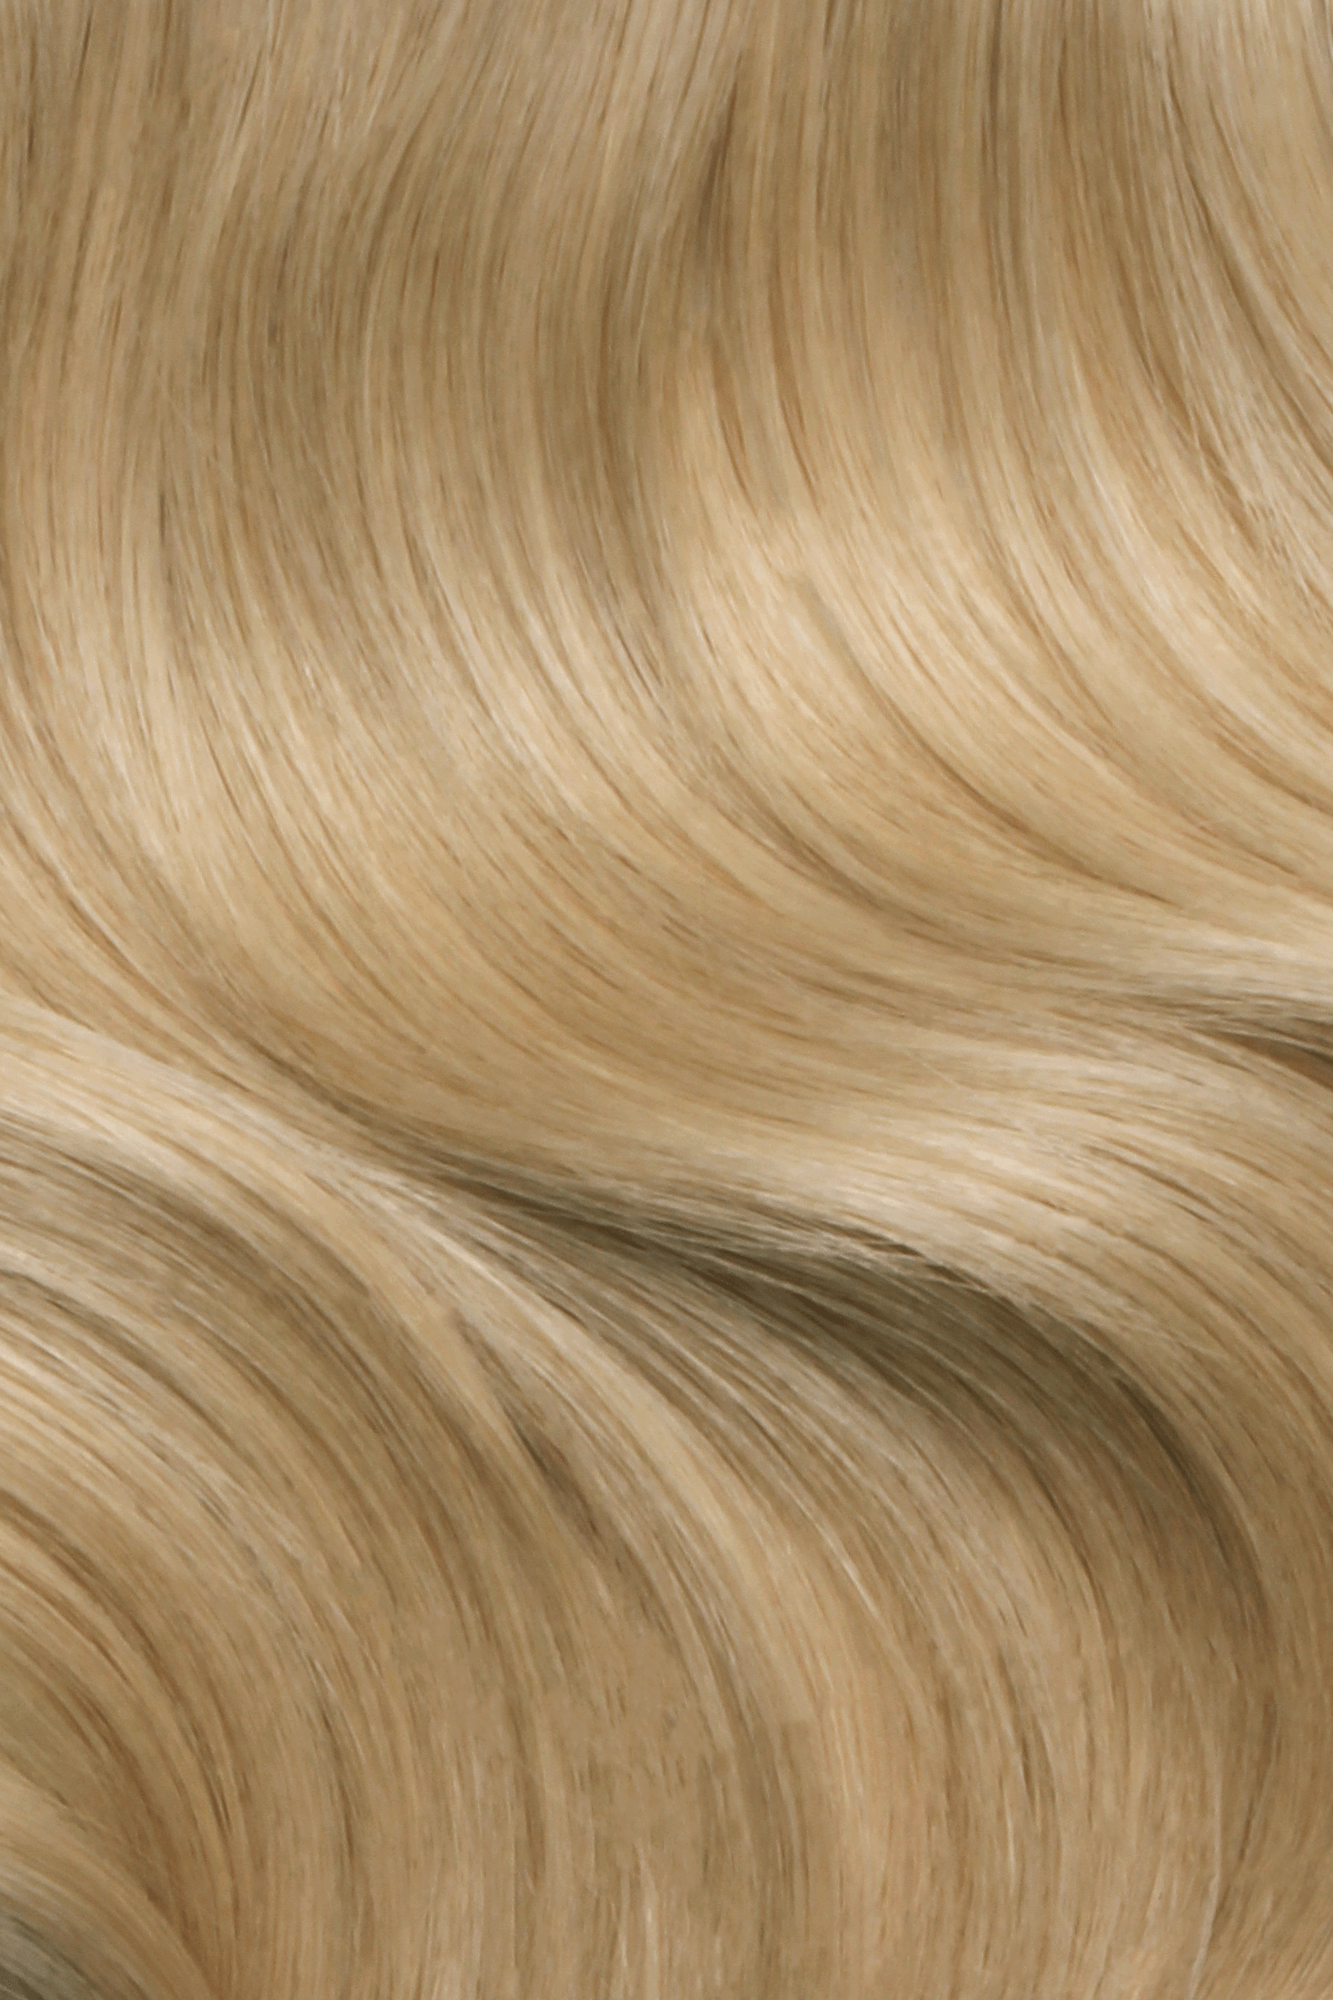 SEAMLESS® Tapes 20 Inches - SWAY Hair Extensions Beach-Ash-Blonde-9-613 clip-in hair extensions made of 100% Double Drawn, Remy Human Hair. SWAY SEAMLESS® Tapes, 20 inches. Lightweight, flexible, and perfect for any hairstyle.